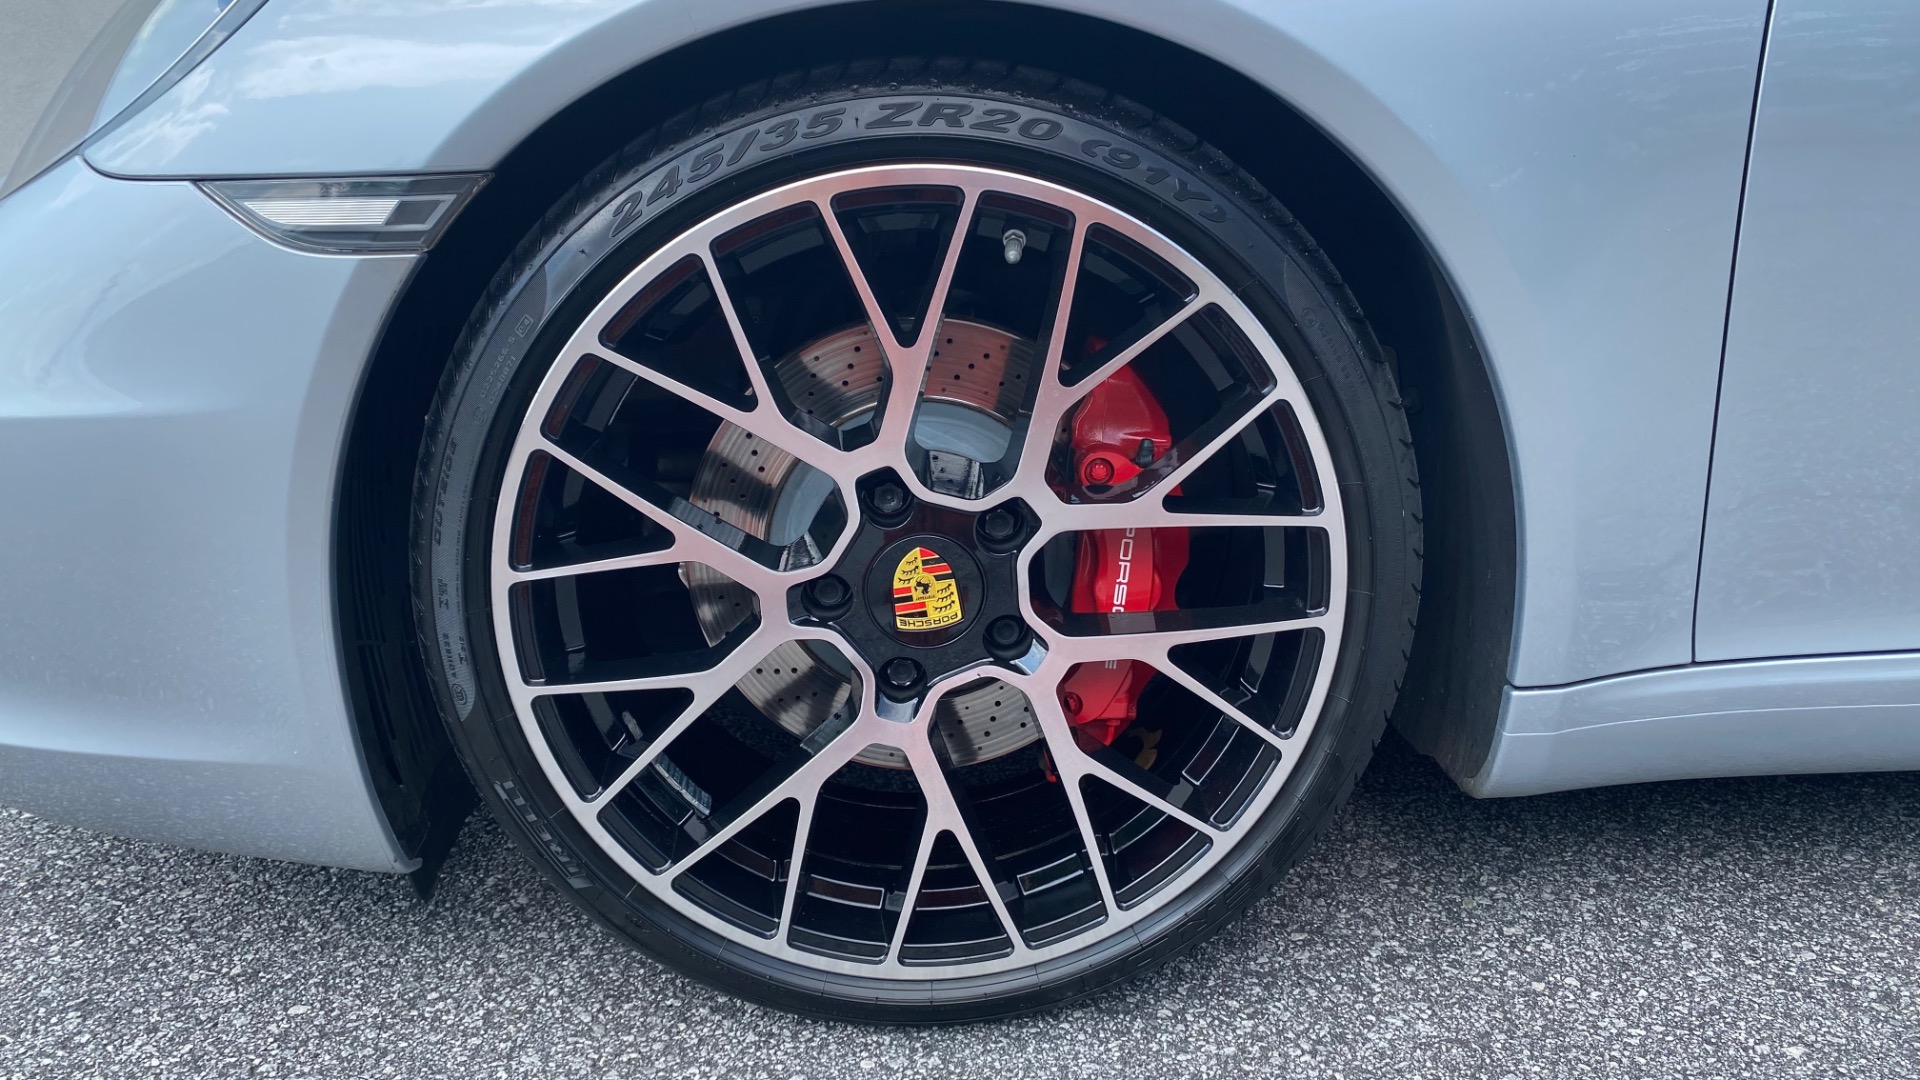 Used 2014 Porsche 911 CARRERA S / SPORT EXHAUST / SPORT DESIGN WHEELS / SPORT SEATS / SPORT CHRON for sale $79,500 at Formula Imports in Charlotte NC 28227 40